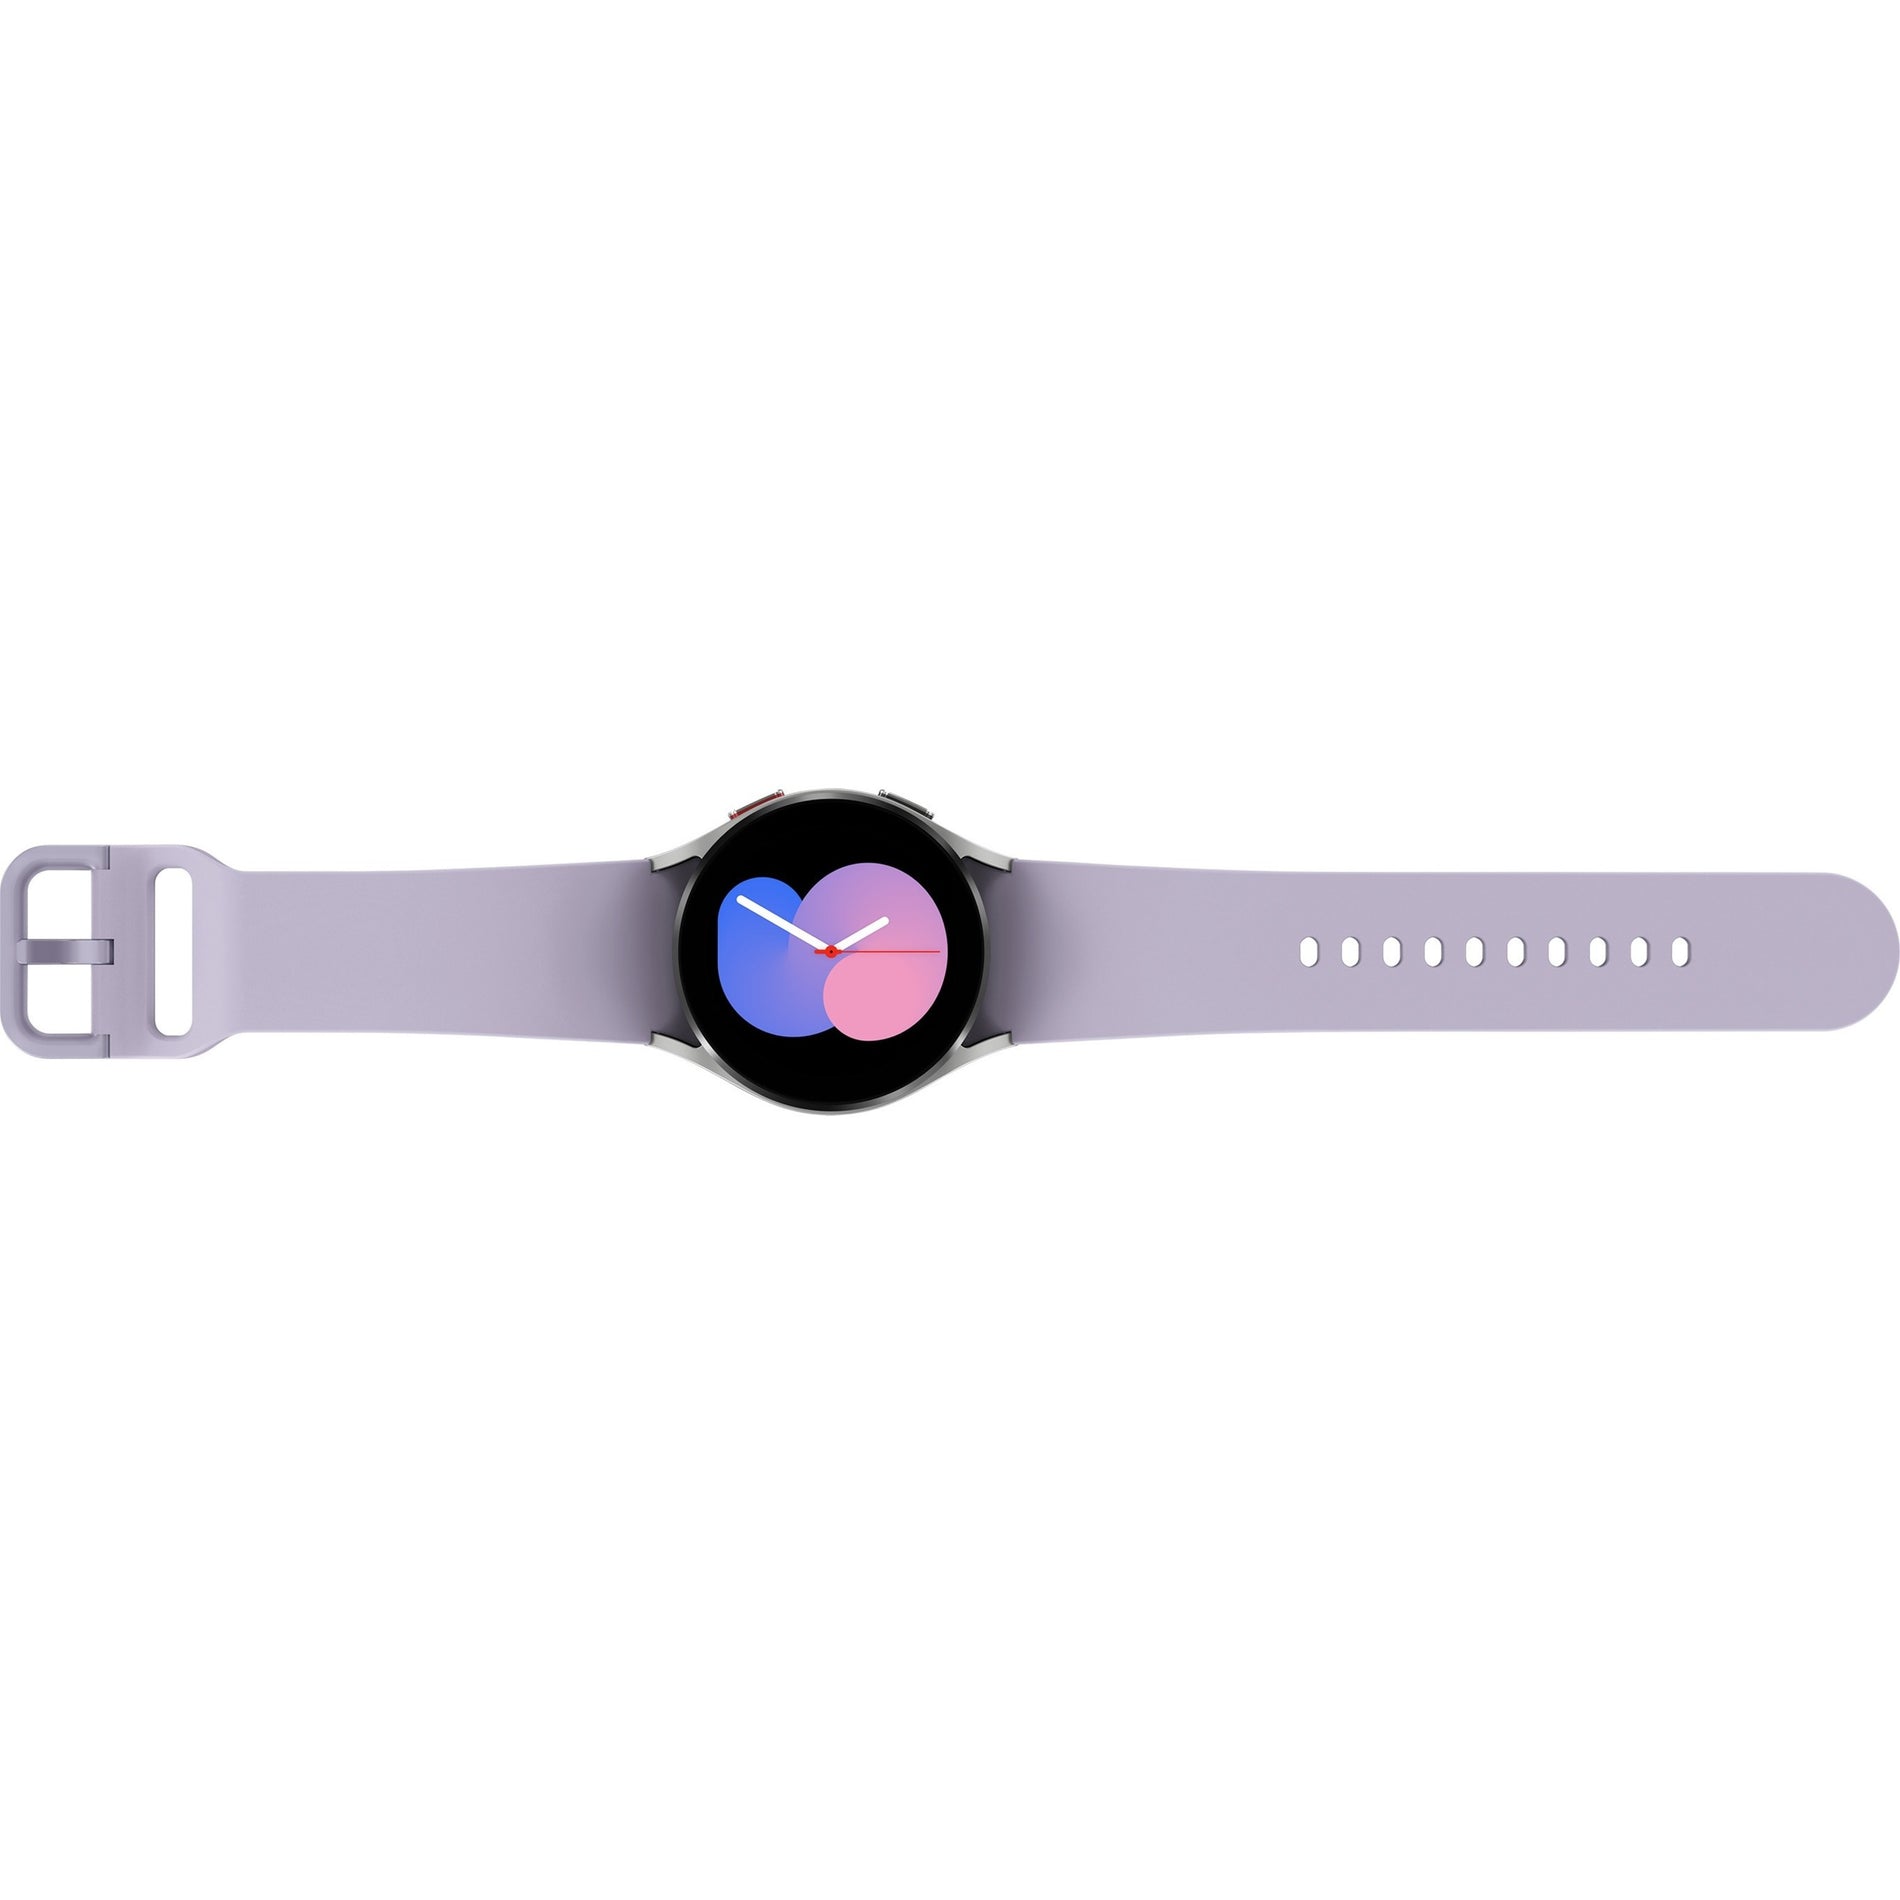 Samsung Galaxy Watch5 - Smart Watch for Swimming, Running, and Health & Fitness [Discontinued]